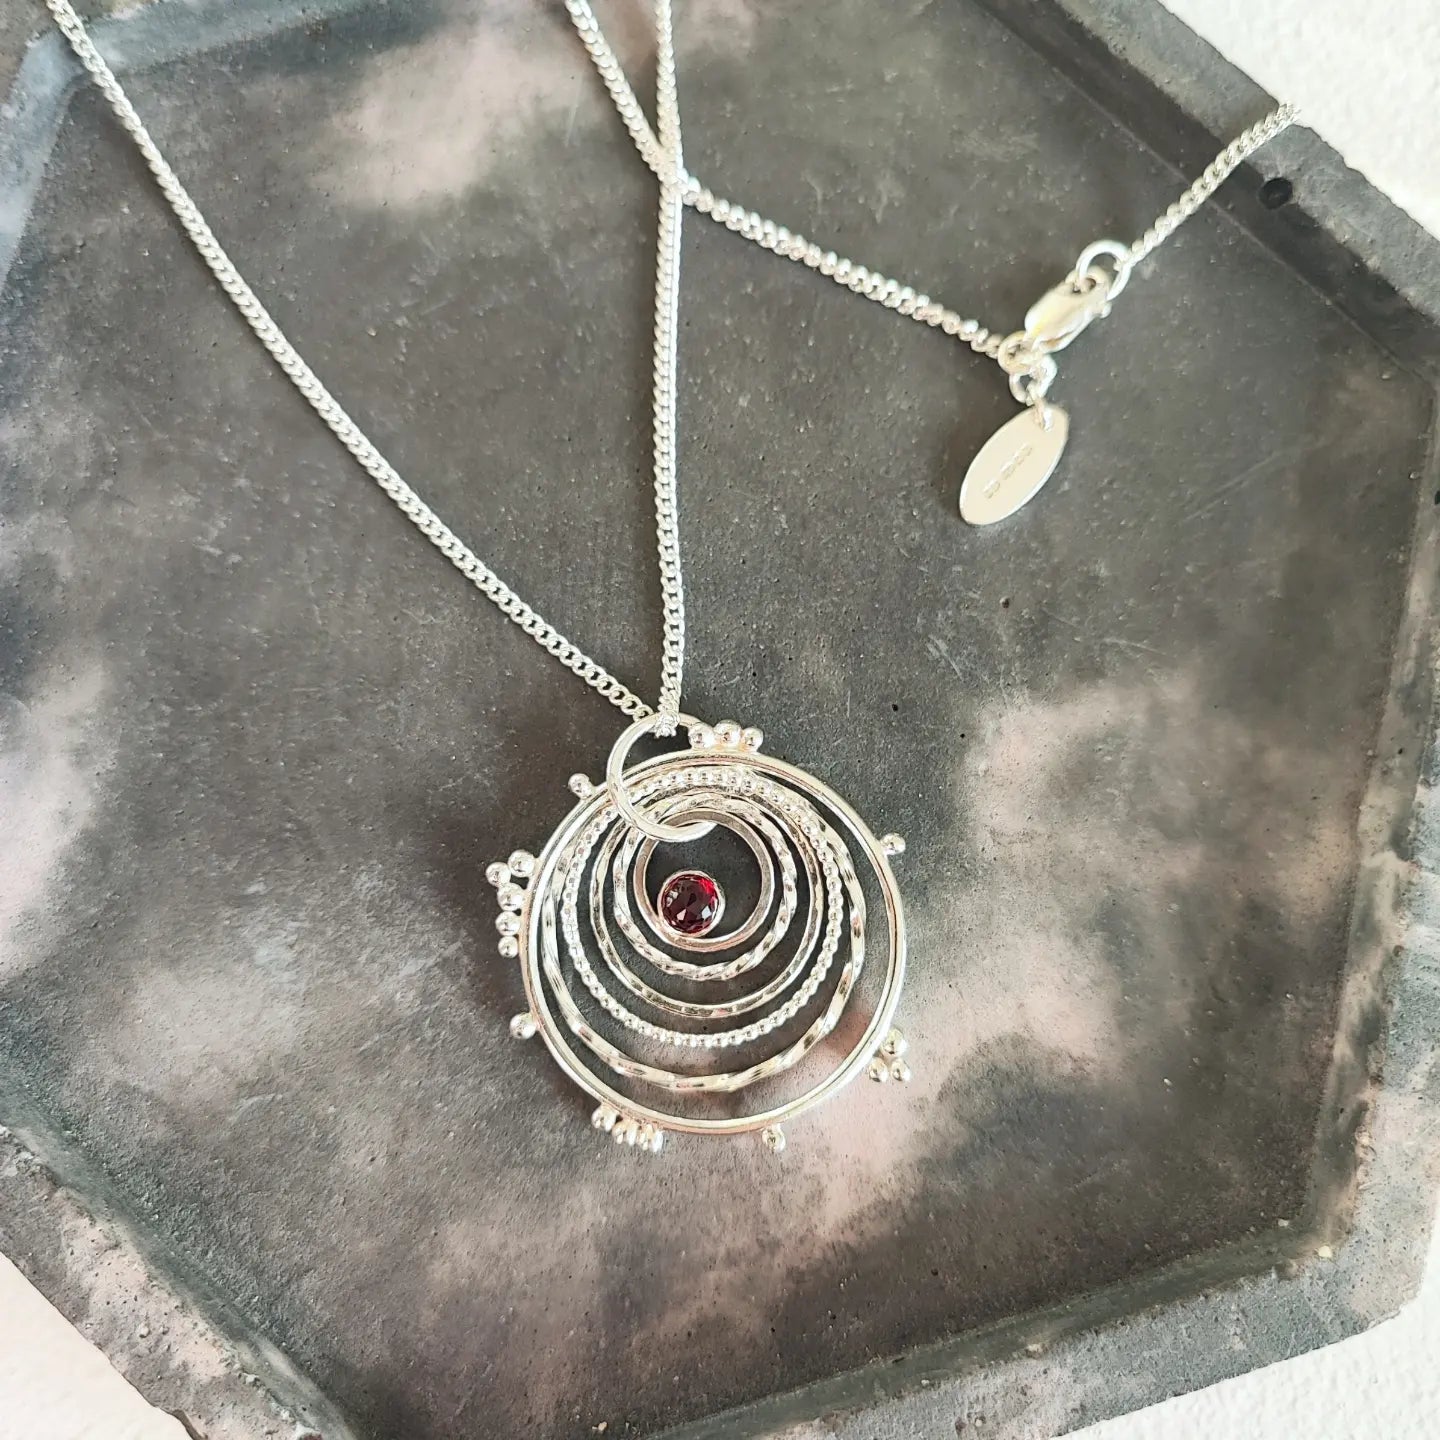 60 Rings for 60 years Pendant